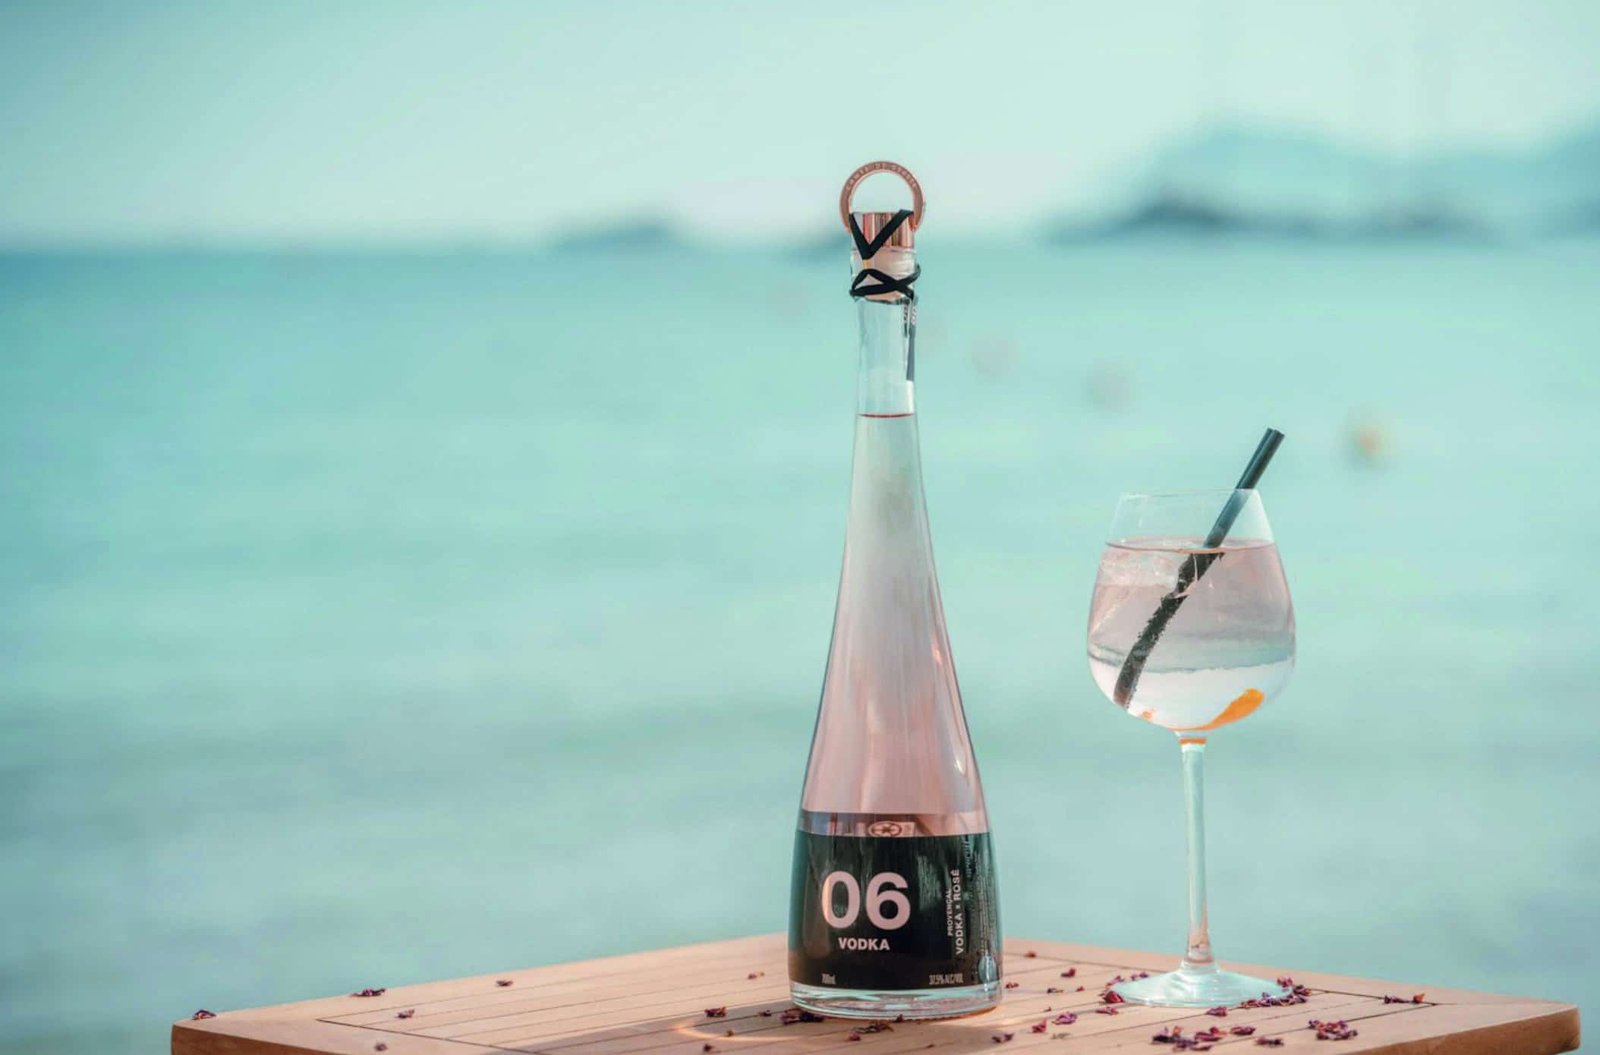 On a table by the ocean, a bottle of rosé is set for tasting, with accompanying notes.